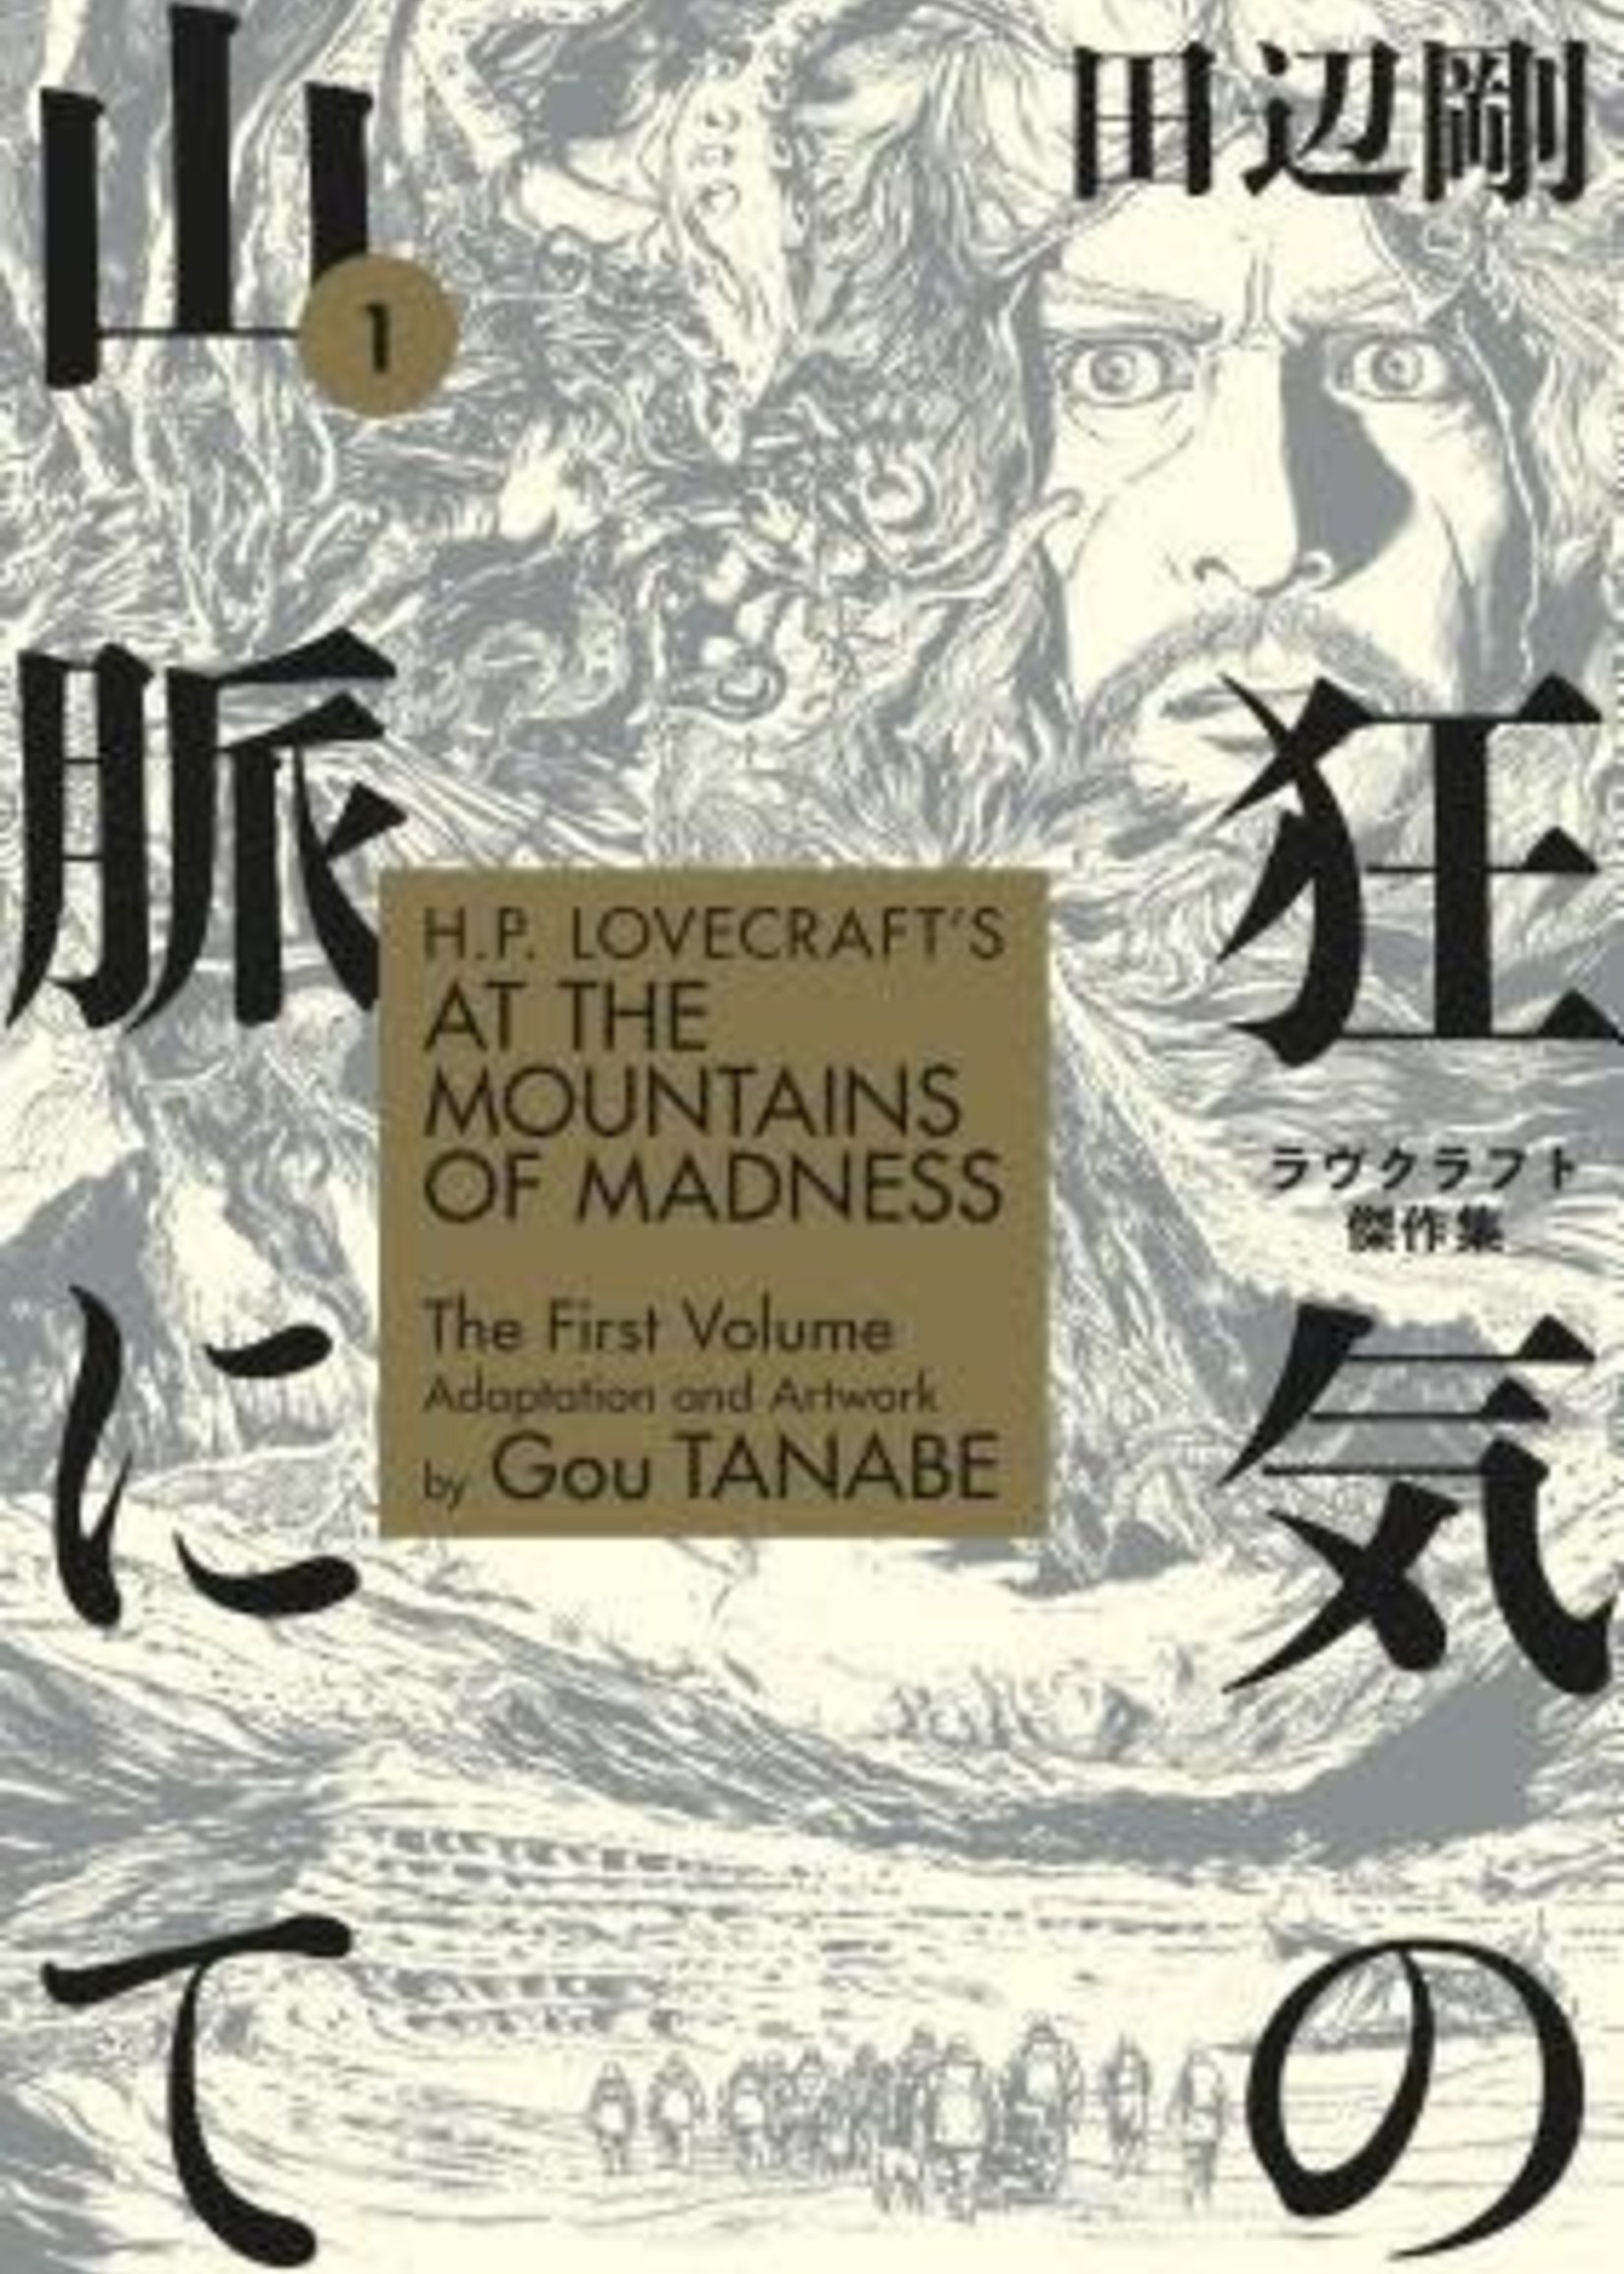 H.P. Lovecraft's At the Mountains of Madness, Volume 1 (Gō Tanabe's Adaptations of H.P. Lovecraft's Masterpieces #1-2) by Gou Tanabe